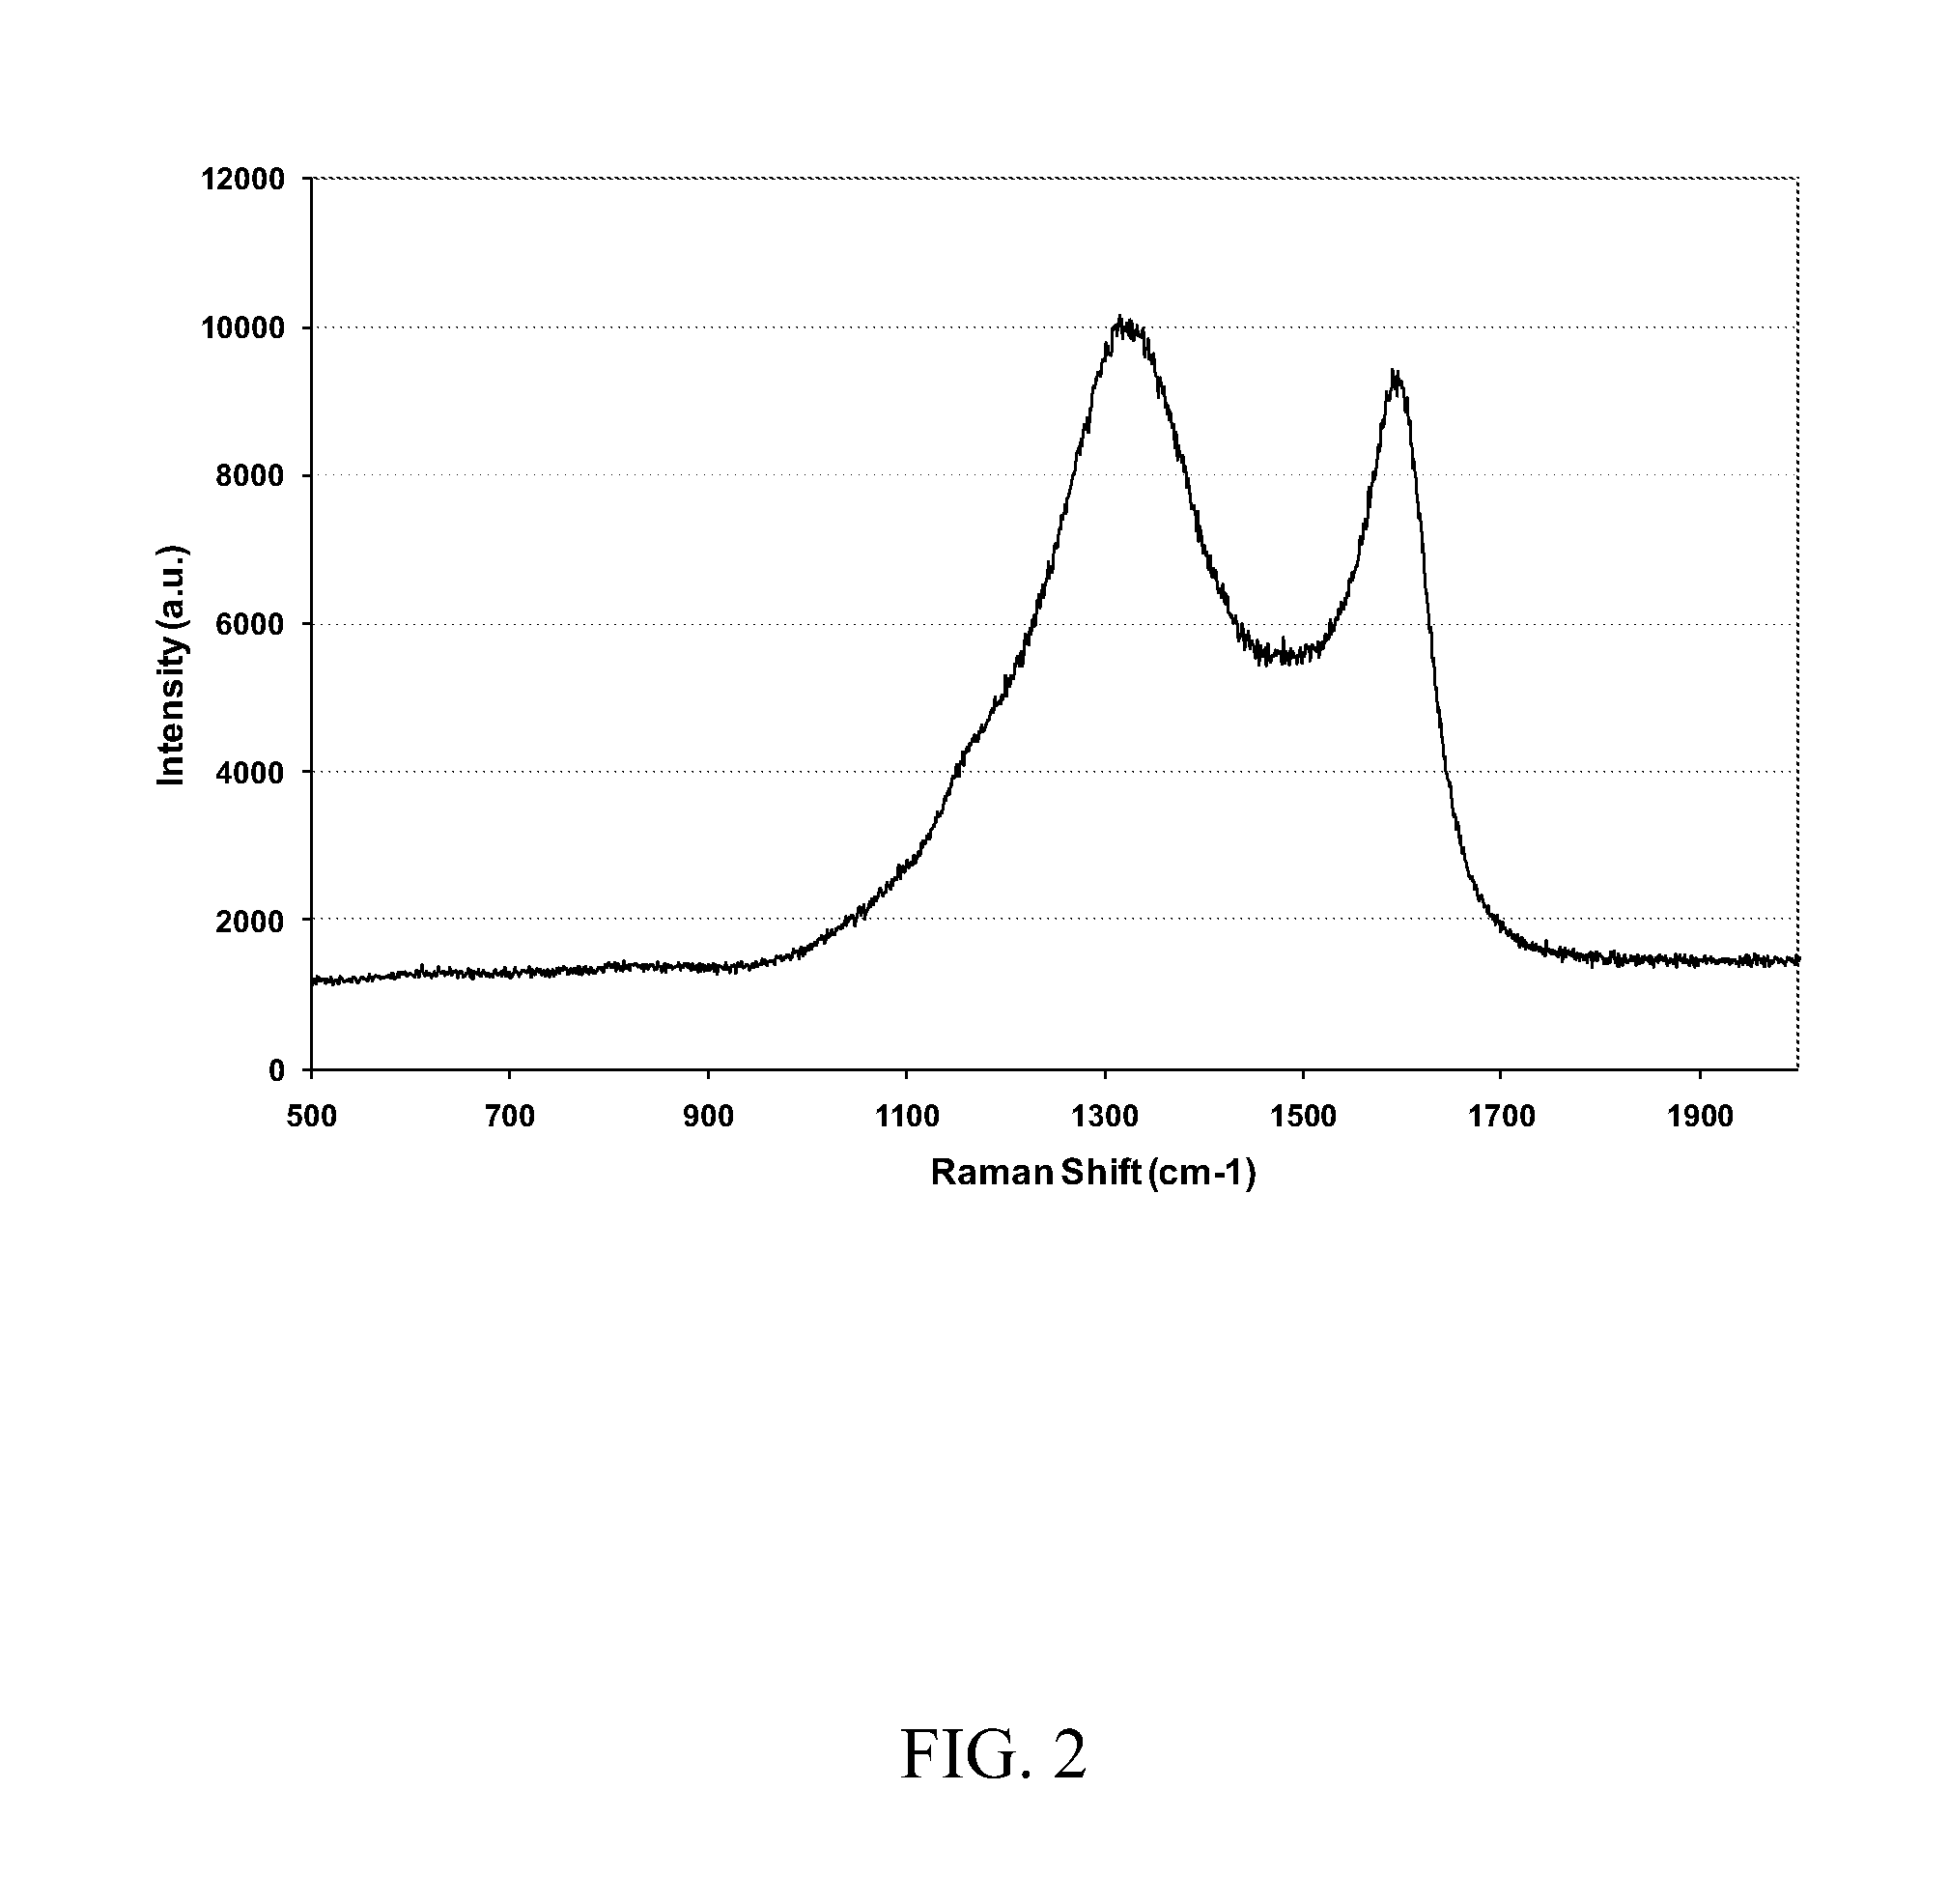 Carbon composition with hierarchical porosity, and methods of preparation